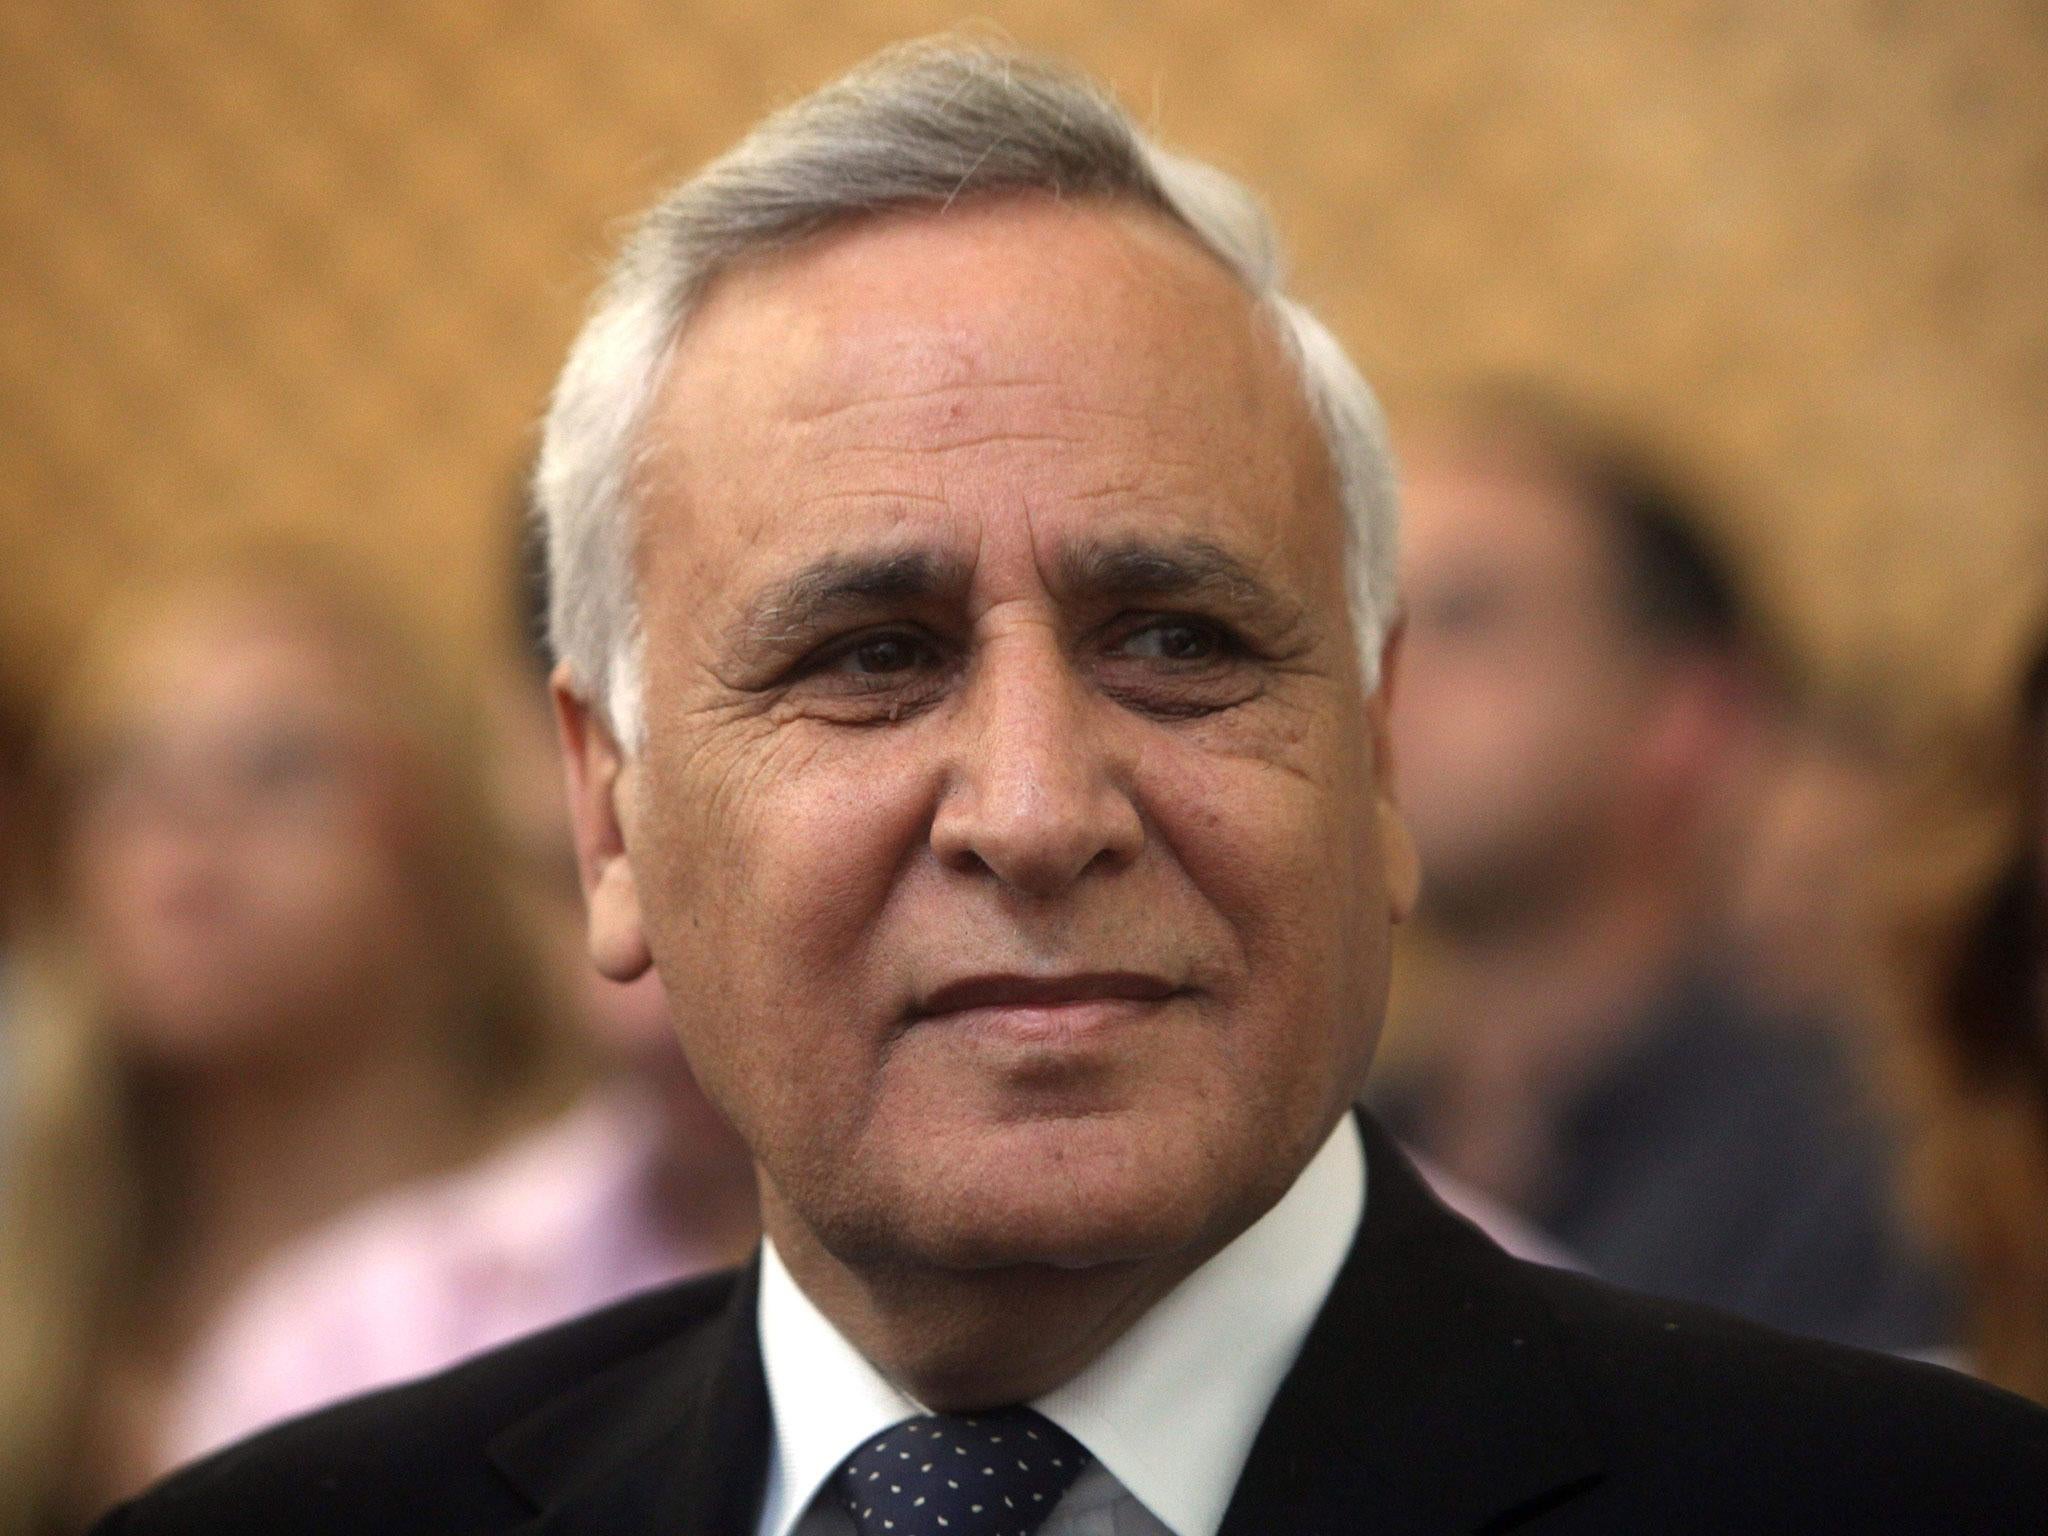 Katsav resigned in 2007 after being charged with raping an aide when he was a cabinet minister and with molesting or sexually harassing two female employees during his term as president